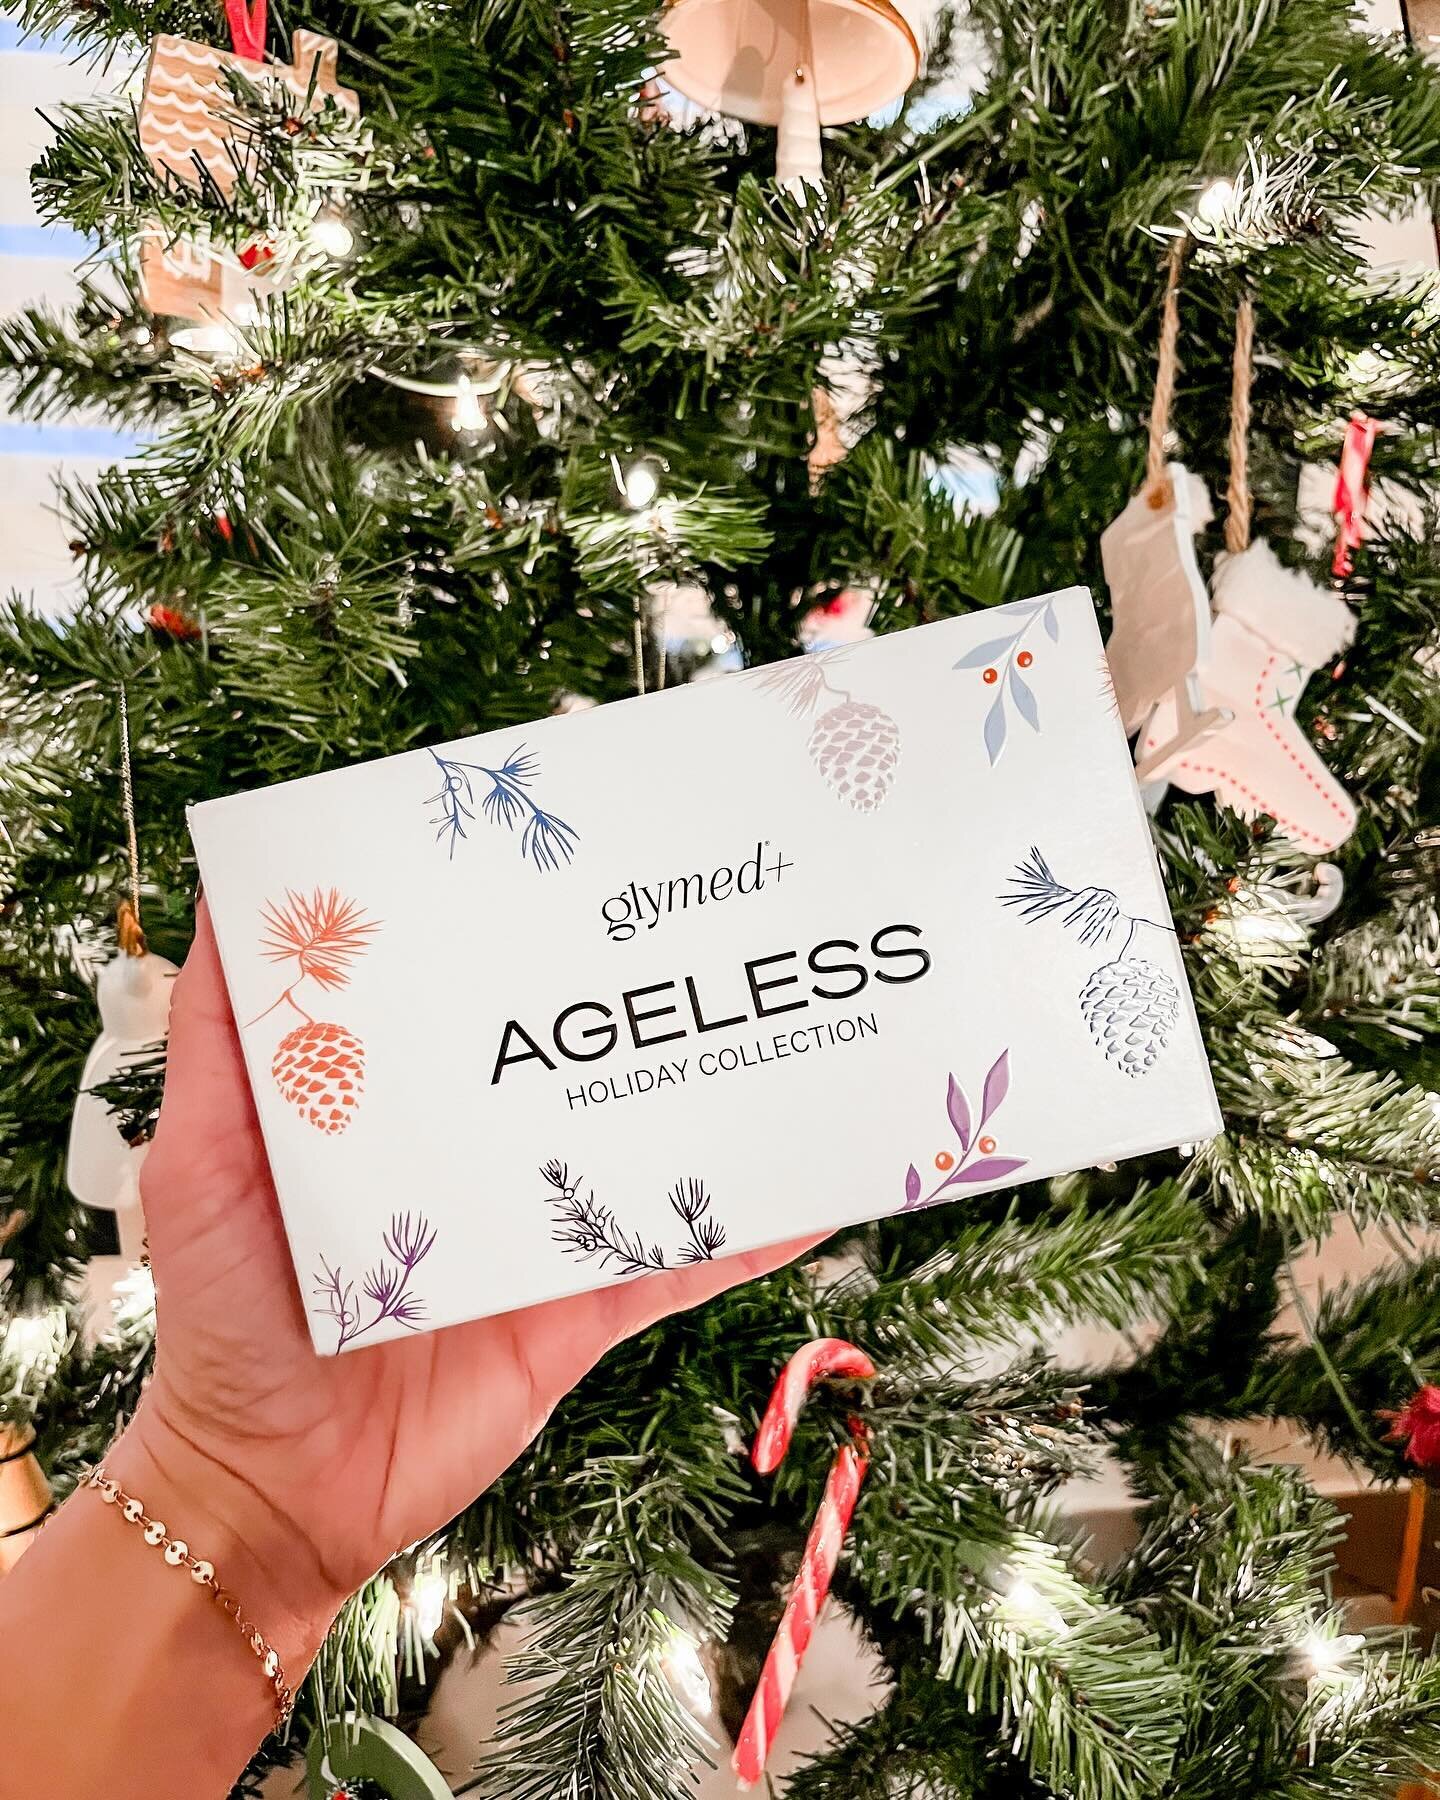 Fun little 𝑪𝒉𝒓𝒊𝒔𝒕𝒎𝒂𝒔 𝙶𝙸𝚅𝙴𝙰𝚆𝙰𝚈 🎄🎅🏽❤️

This Glymed+ Ageless set is packed full of anti-aging ingredients designed to stimulate collagen production and promote cell renewal to lift and firm your skin!

How to enter:
🎄 Like and save 